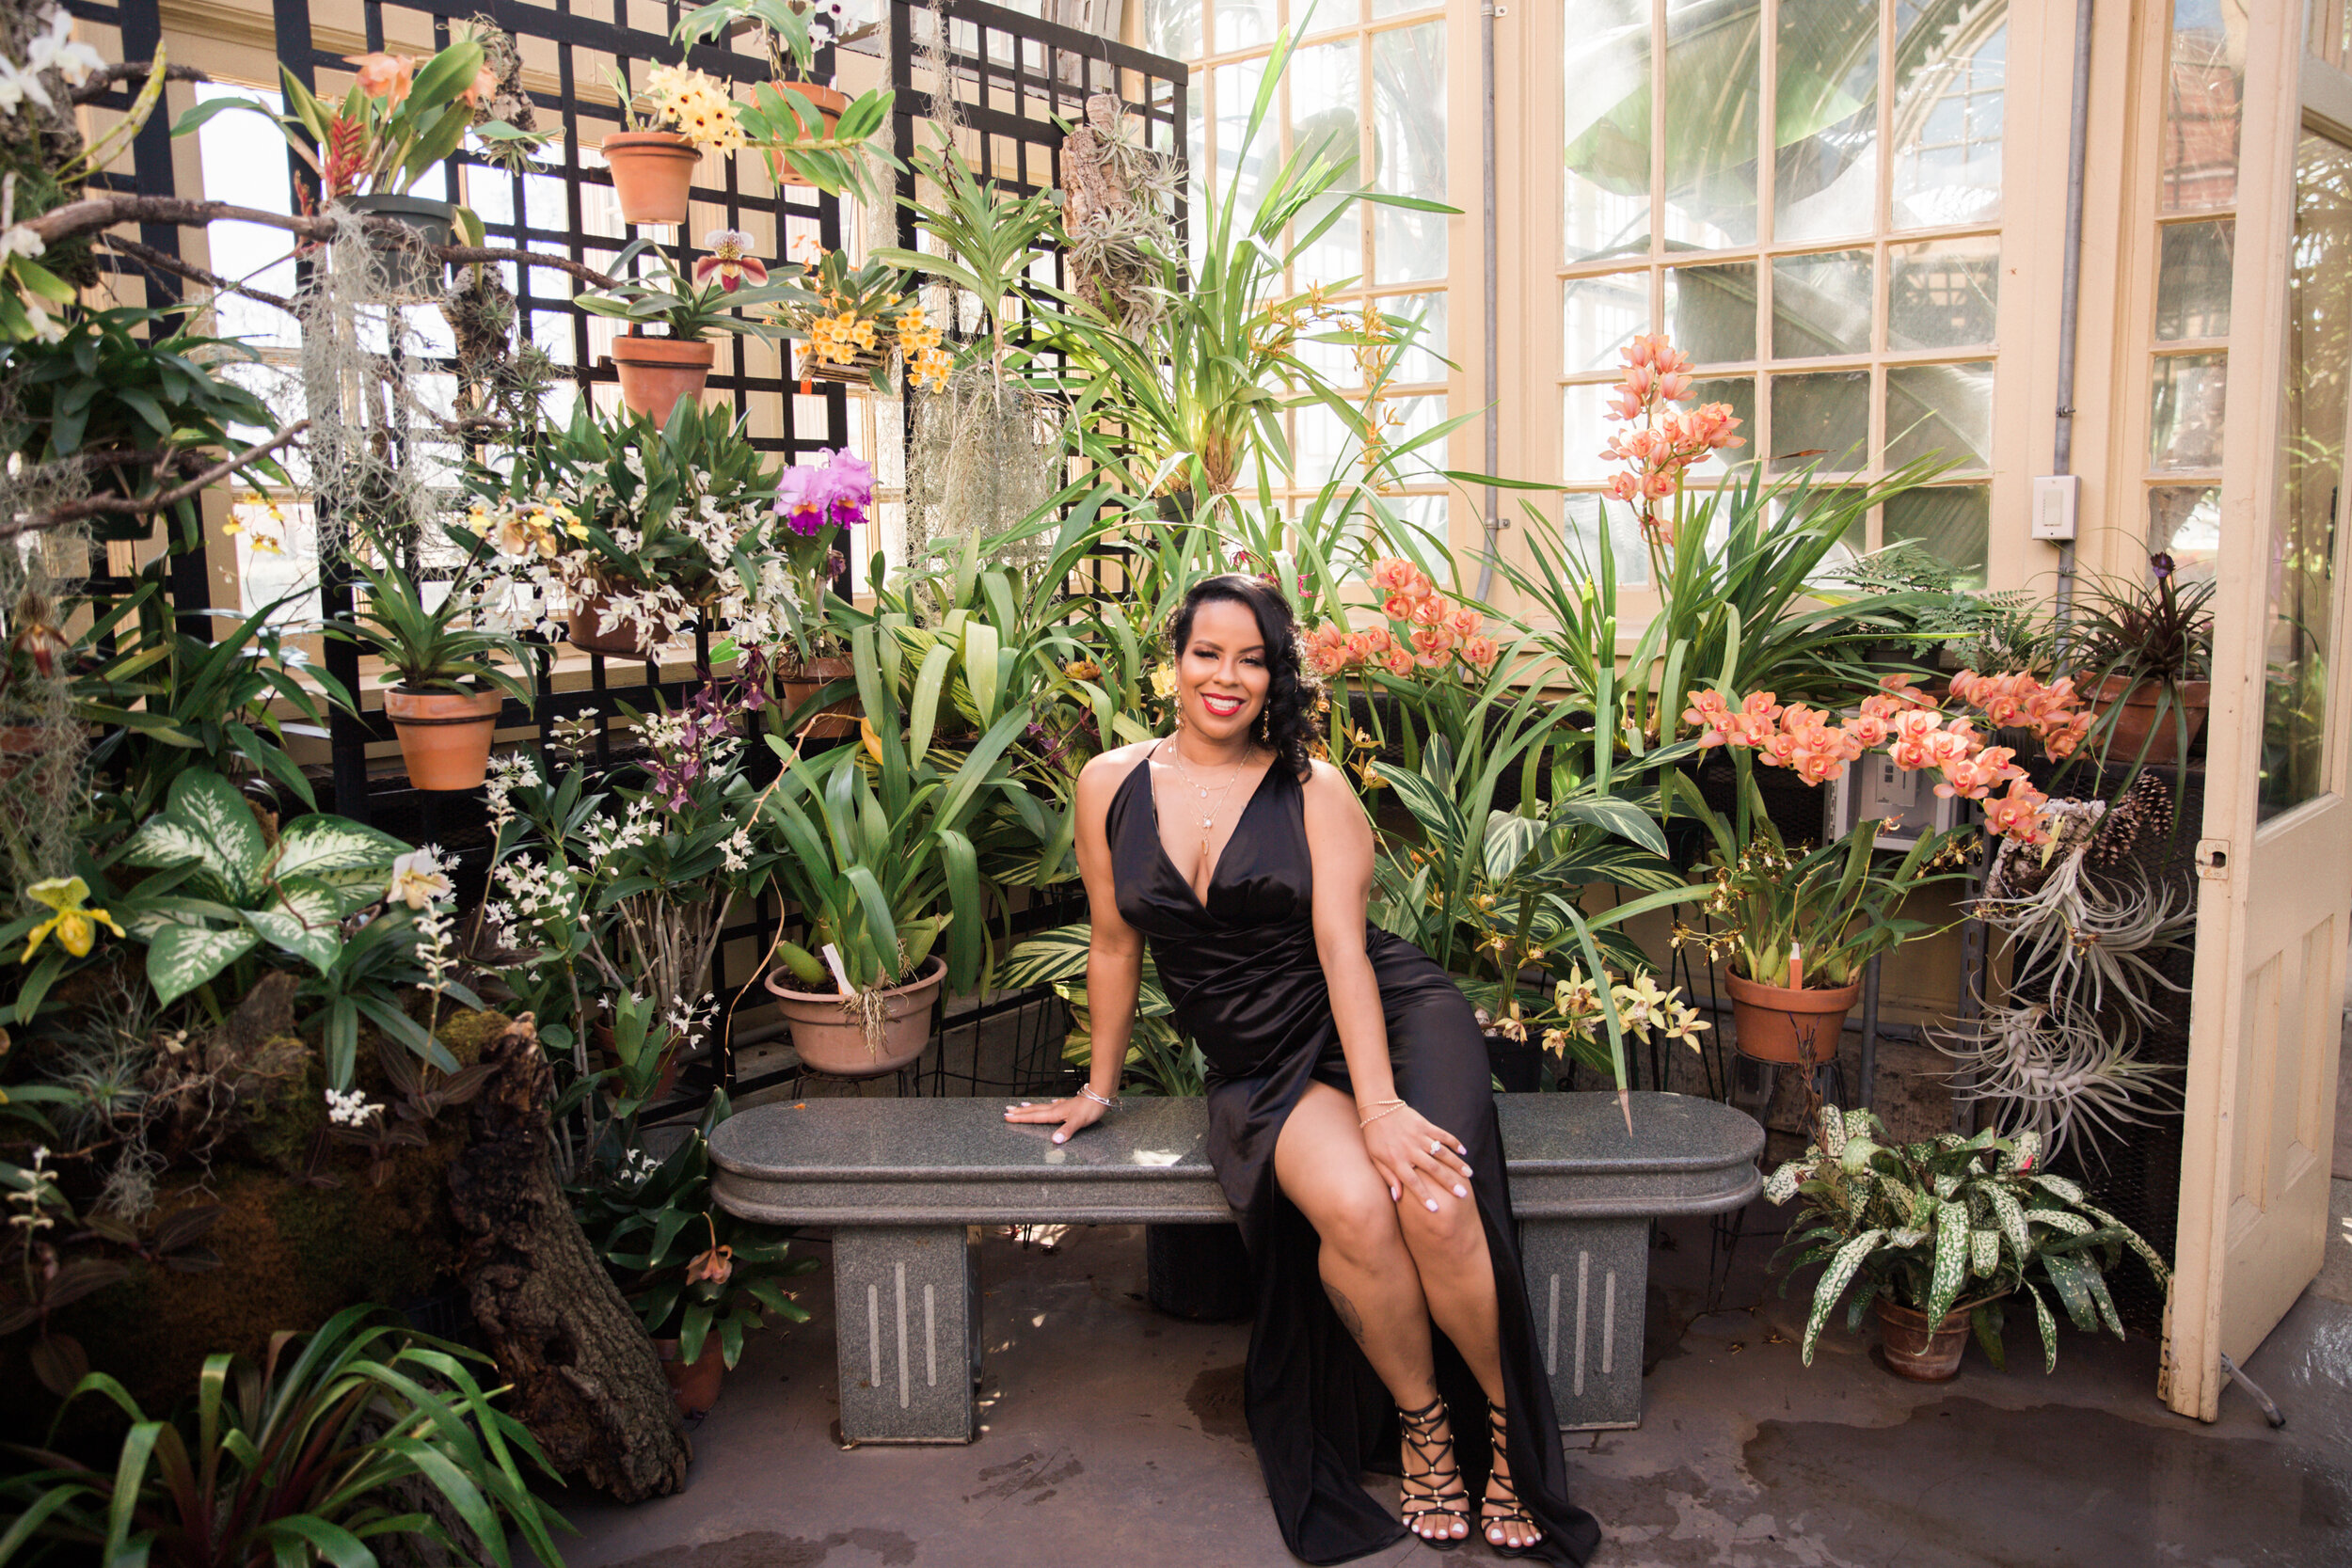 Best Wedding Photographers in Baltimore Free Engagement Session Maryland Megapixels Media Photography Rawlings Conservatory Engagement Photos Black Dress Black Couple in Love-38.jpg